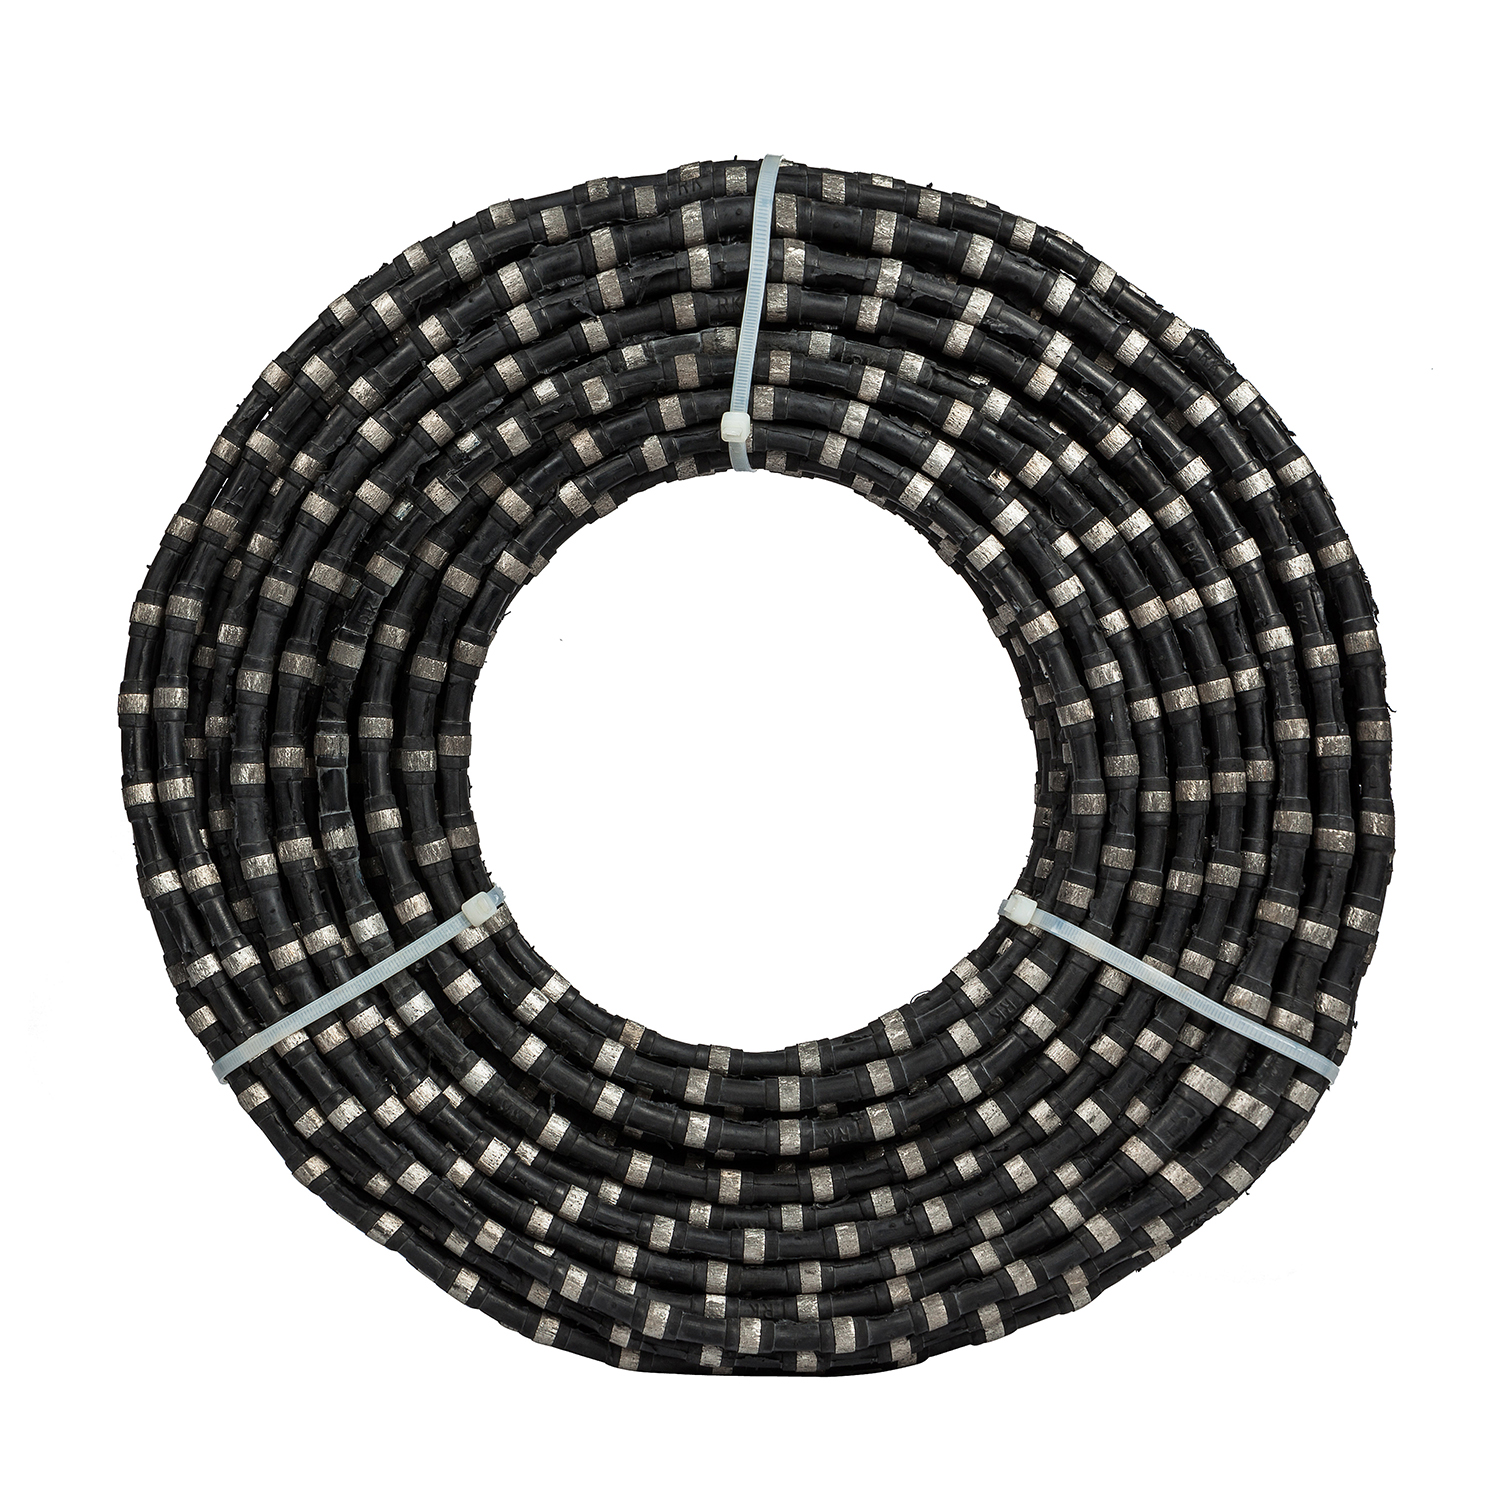 Diamond wire saw for concrete and stone sawing